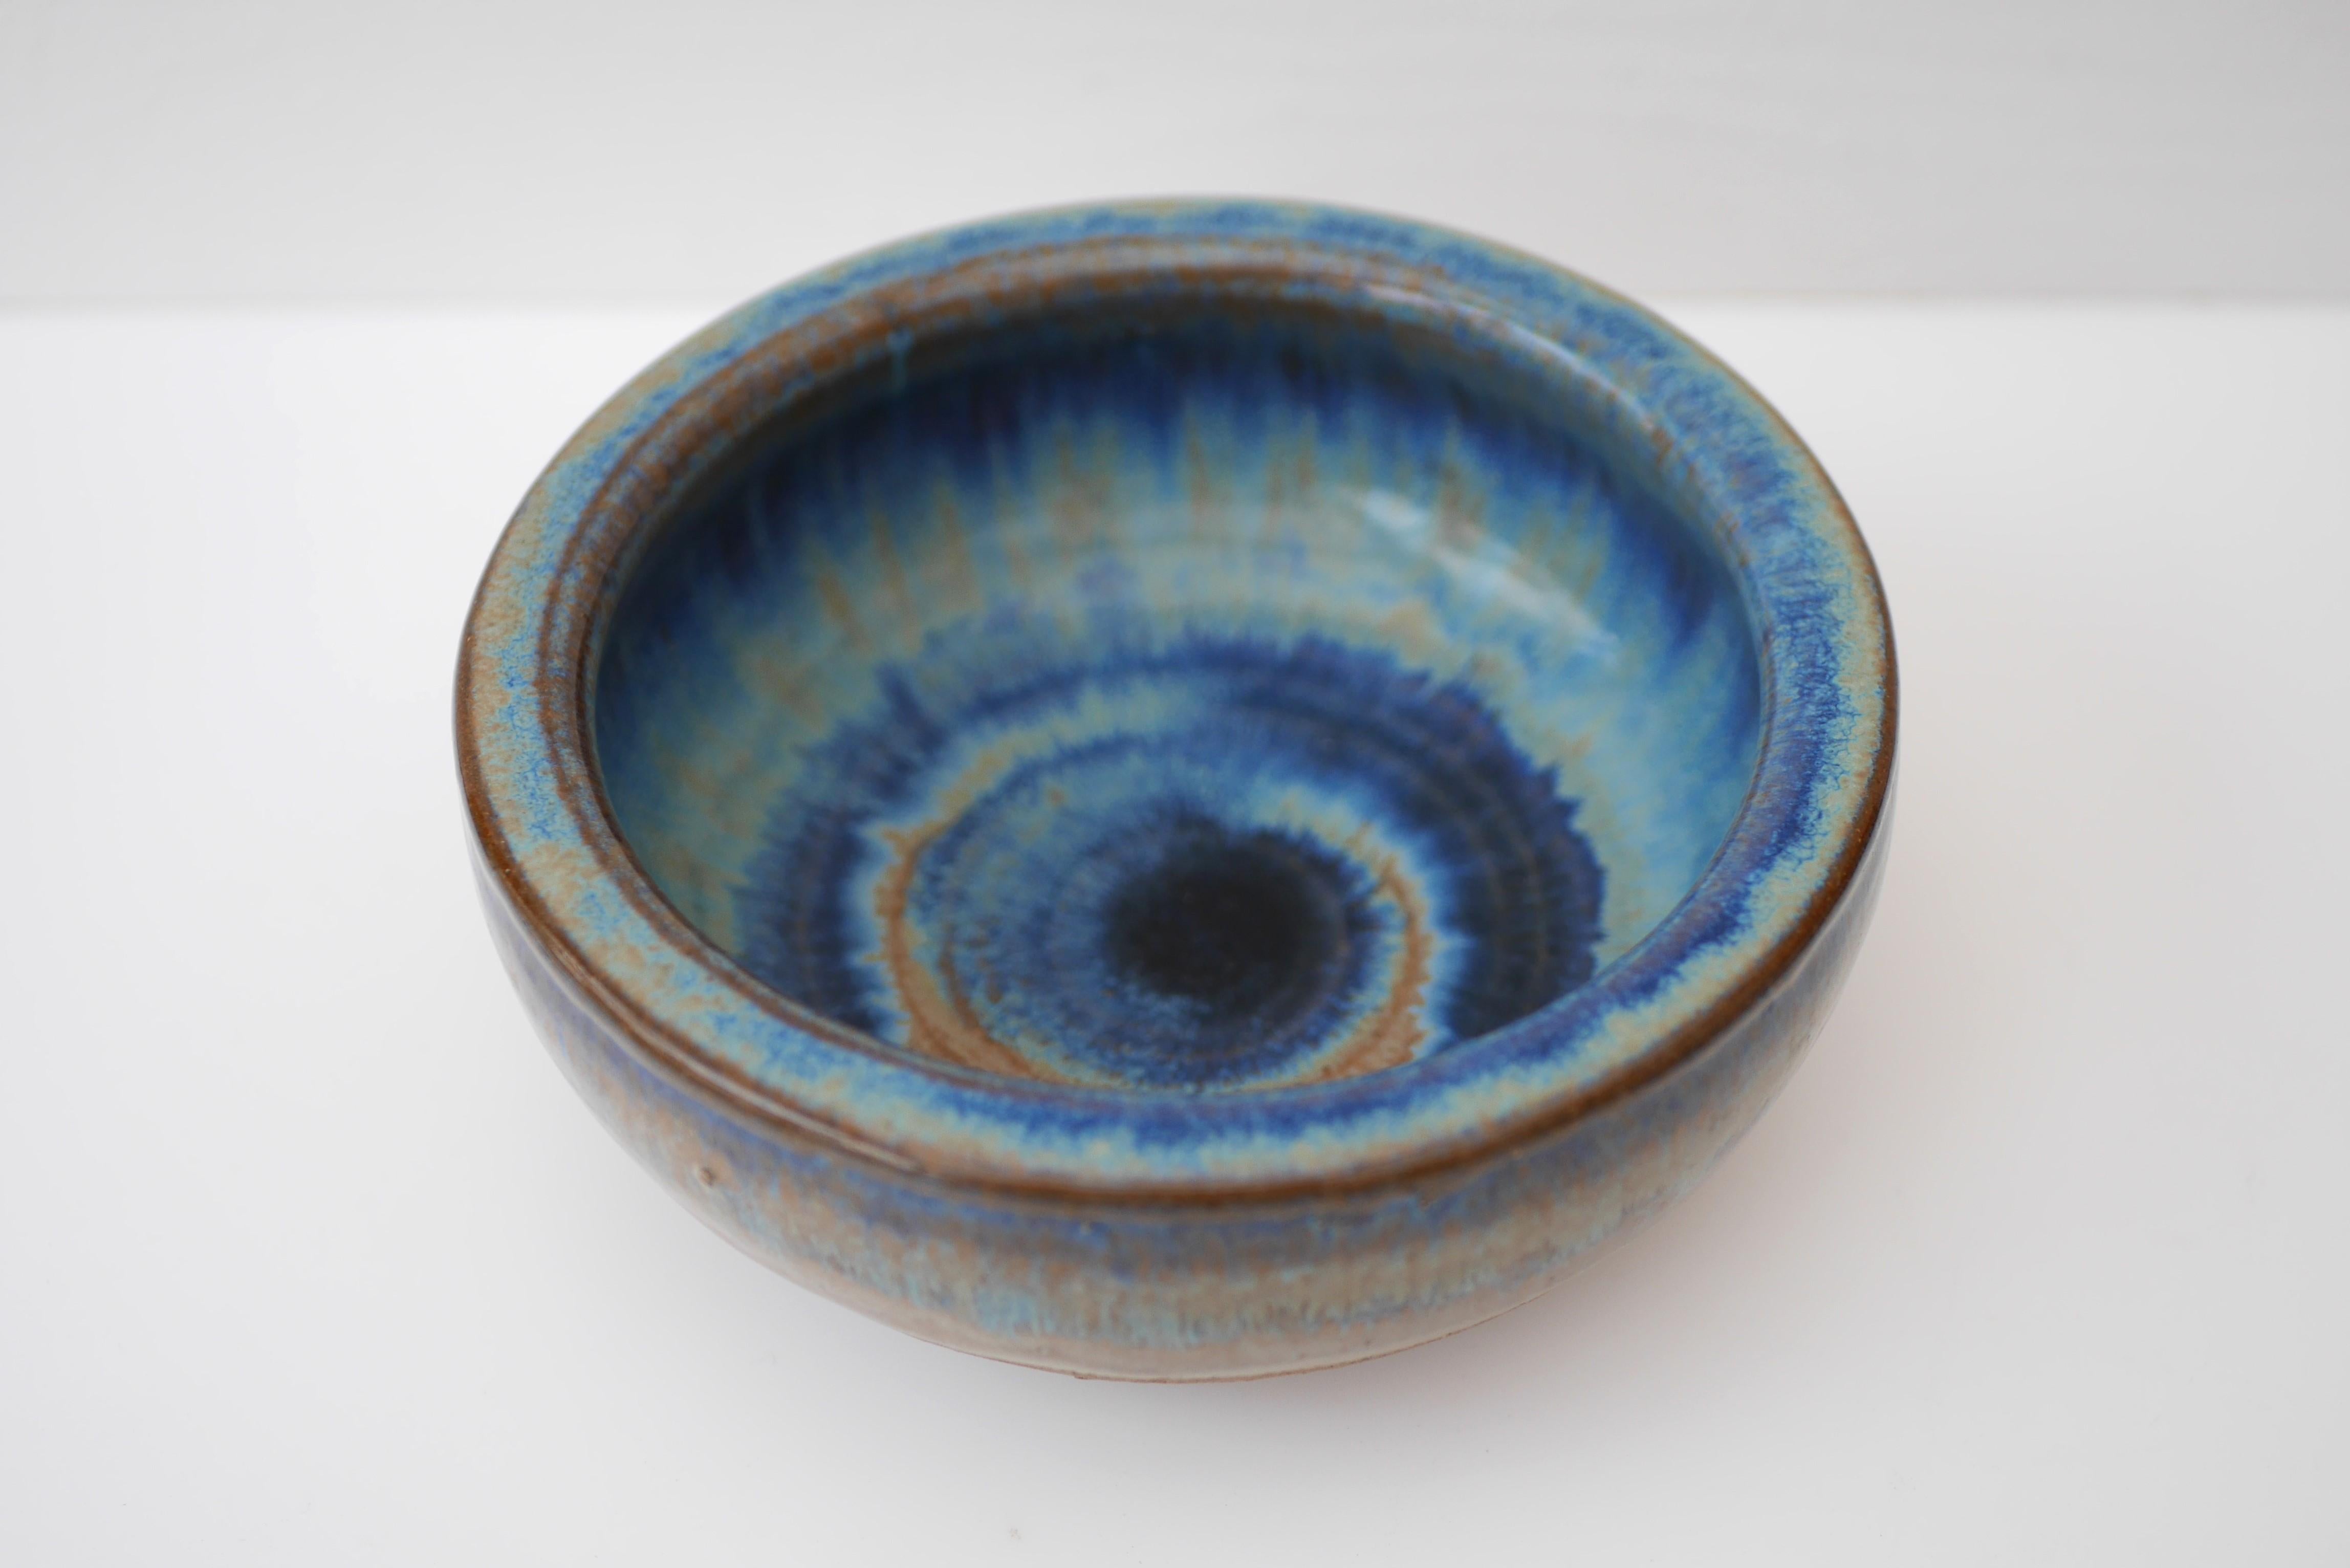 A beautiful stoneware vintage Bornholm pottery bowl from Denmark. Made by the talented Michael Andersen, this bowl is iconic and so typical for this company, especially when it comes to the glazing. The colors are a very nice various shades of blue